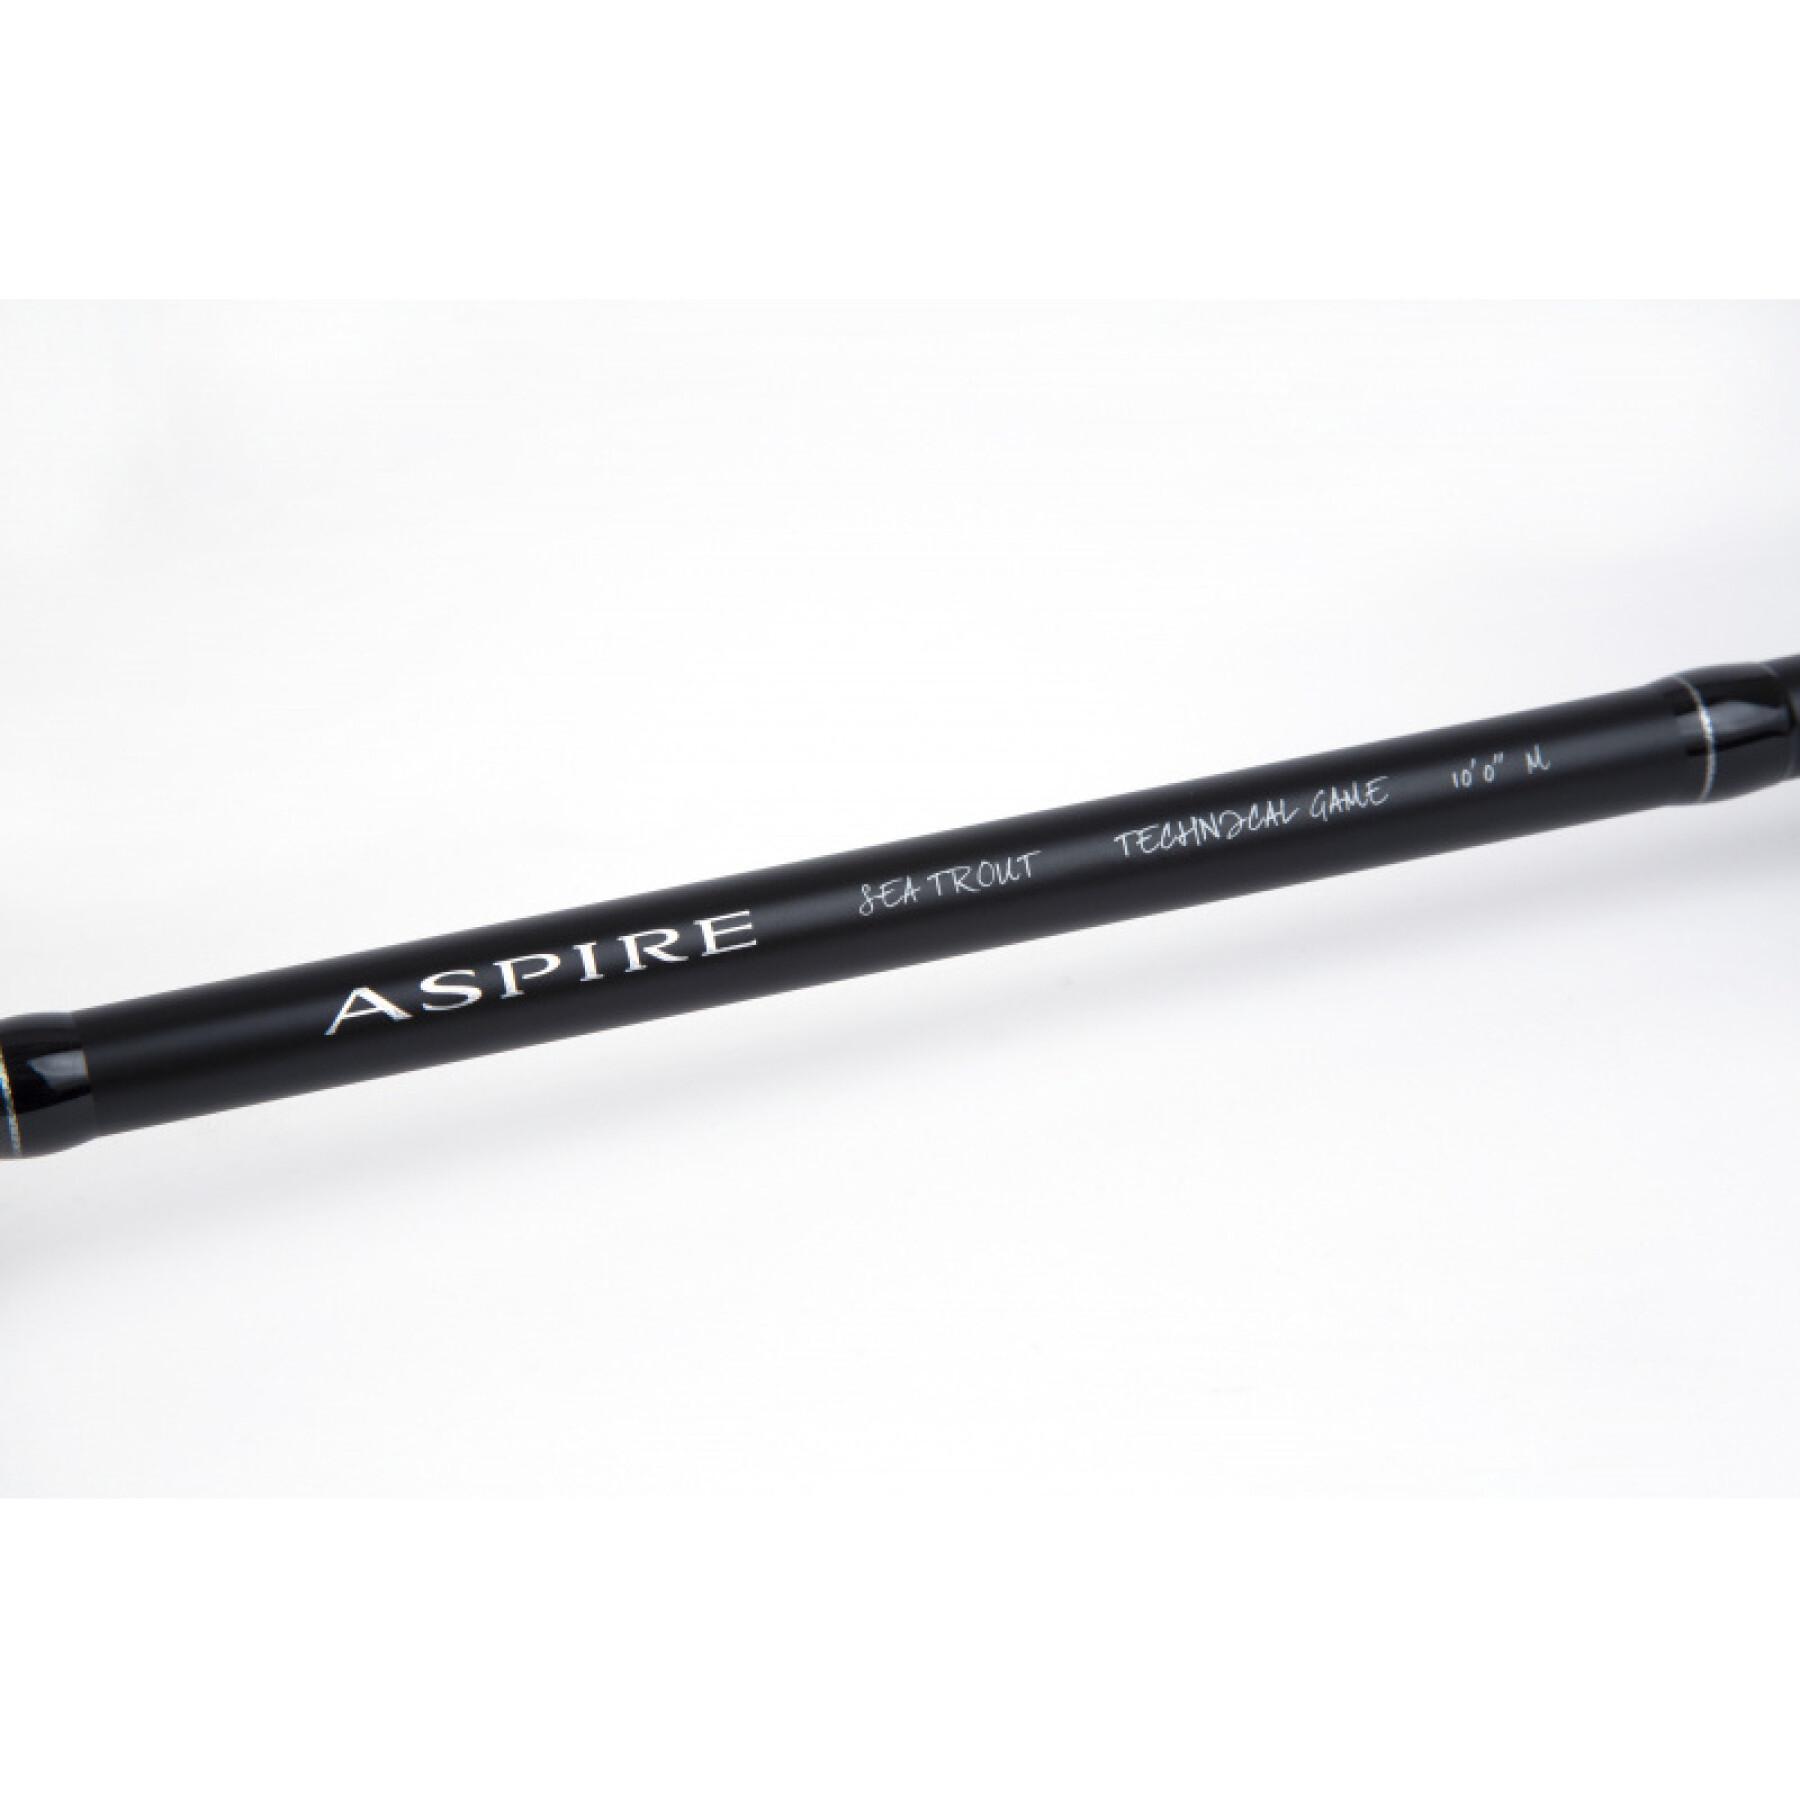 Spinnrute Shimano Aspire Spinning Sea Trout 9'0 7-30g